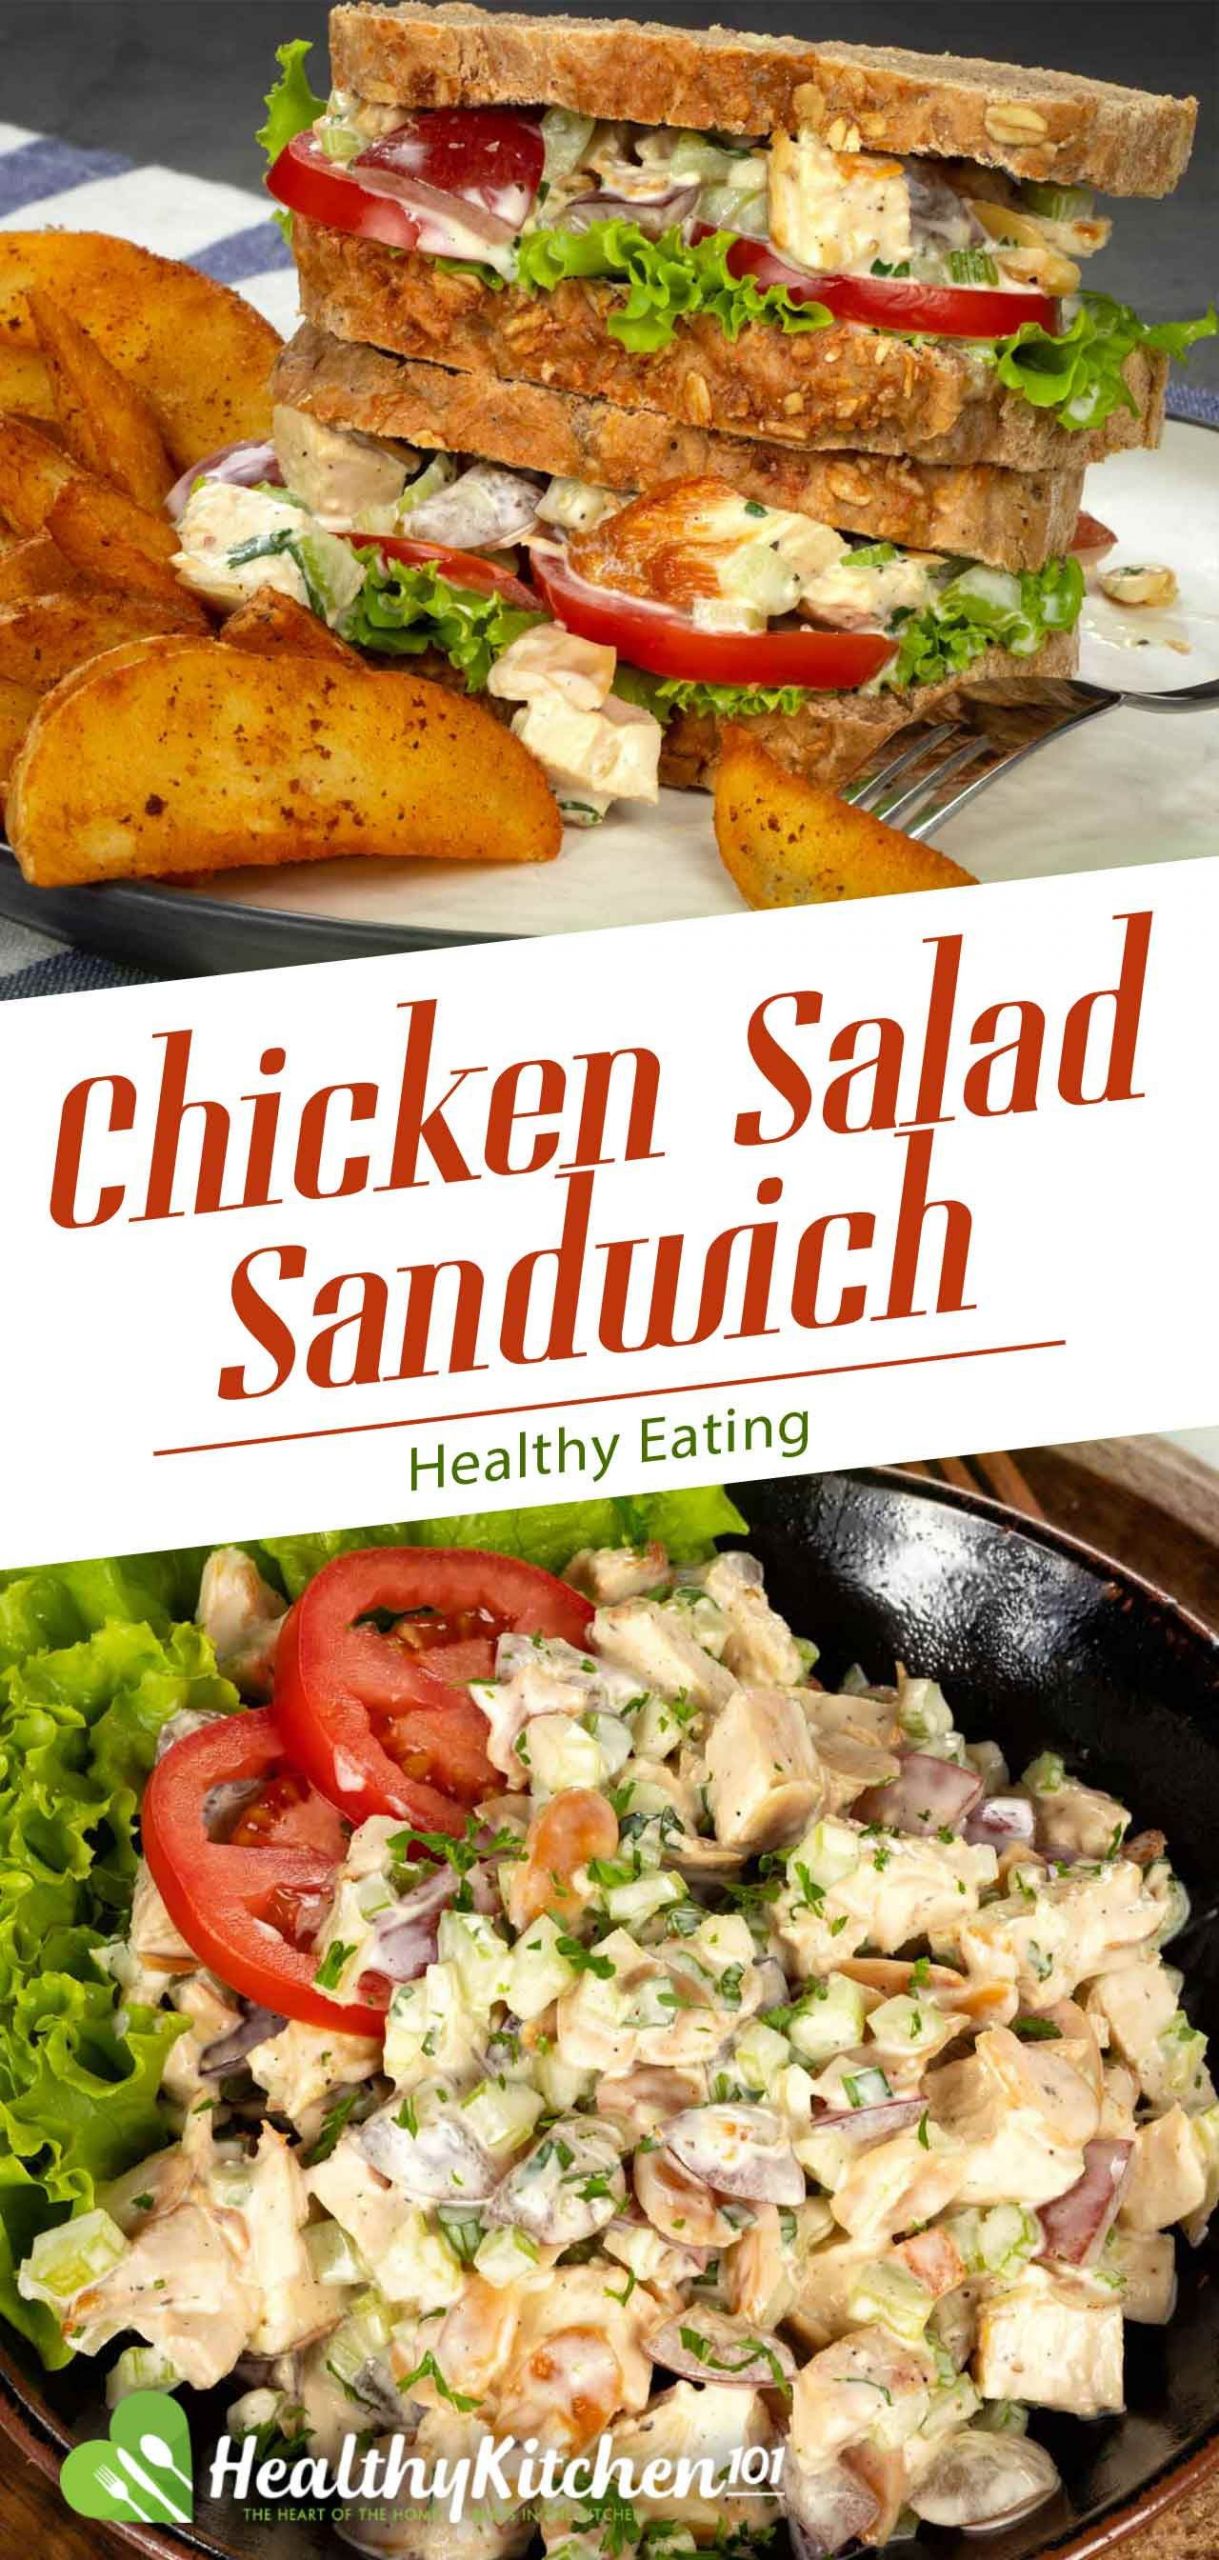 35 Of the Best Ideas for Healthy Side Dishes for Sandwiches - Best ...